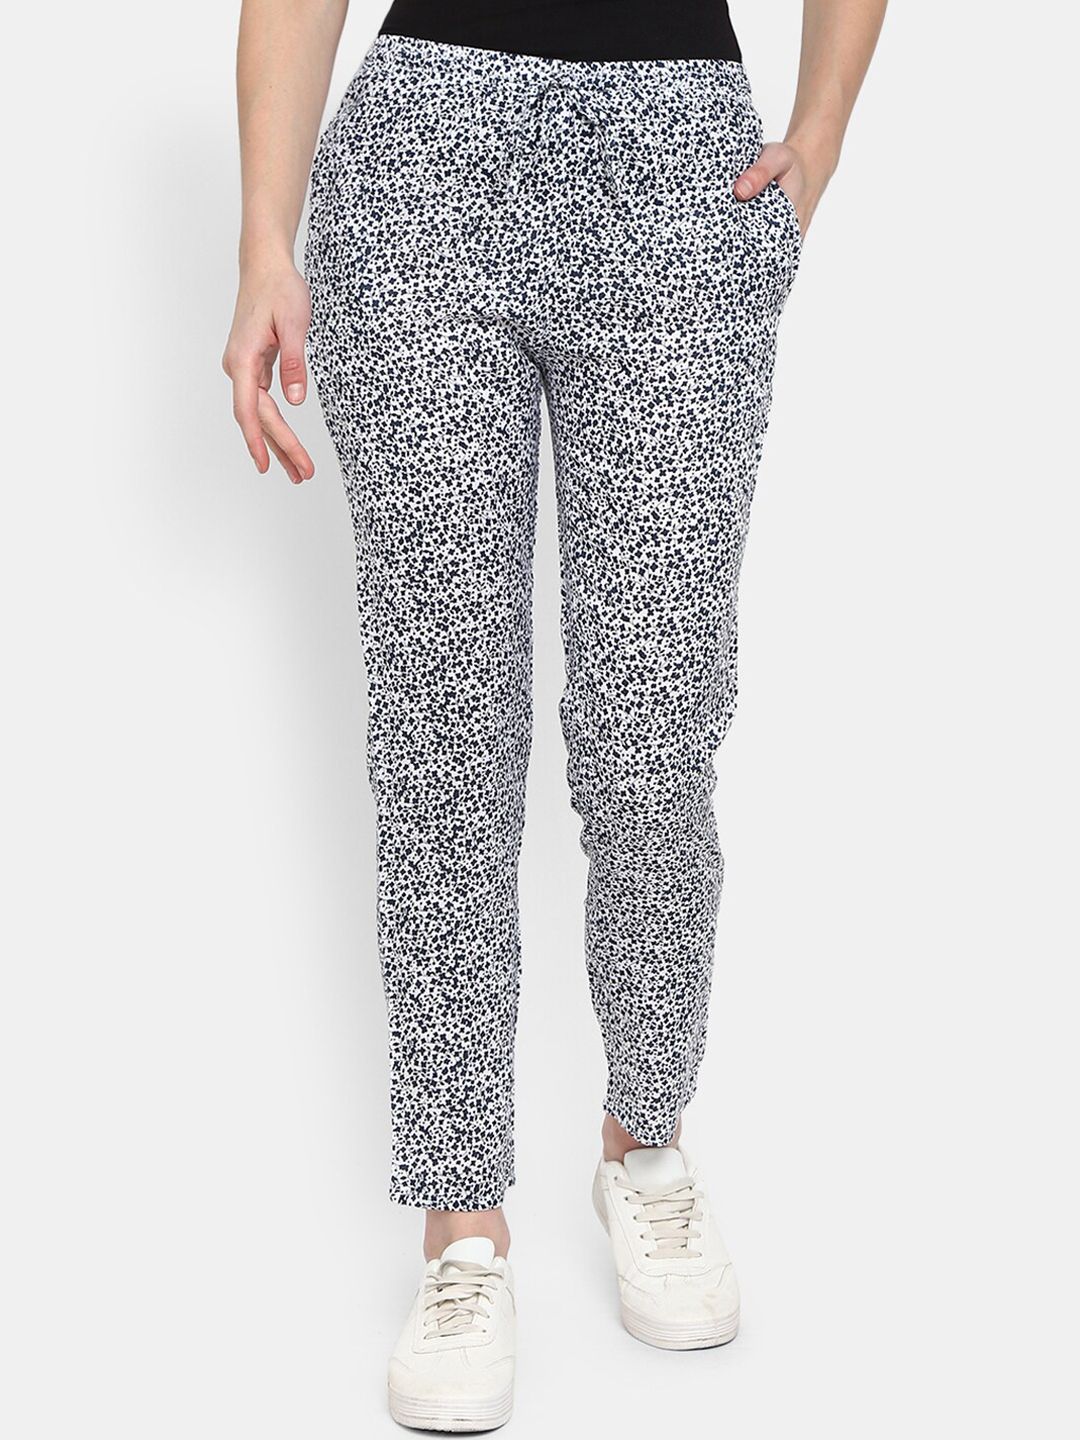 V-Mart Women White & Navy Blue Floral Printed Lounge Pants Price in India